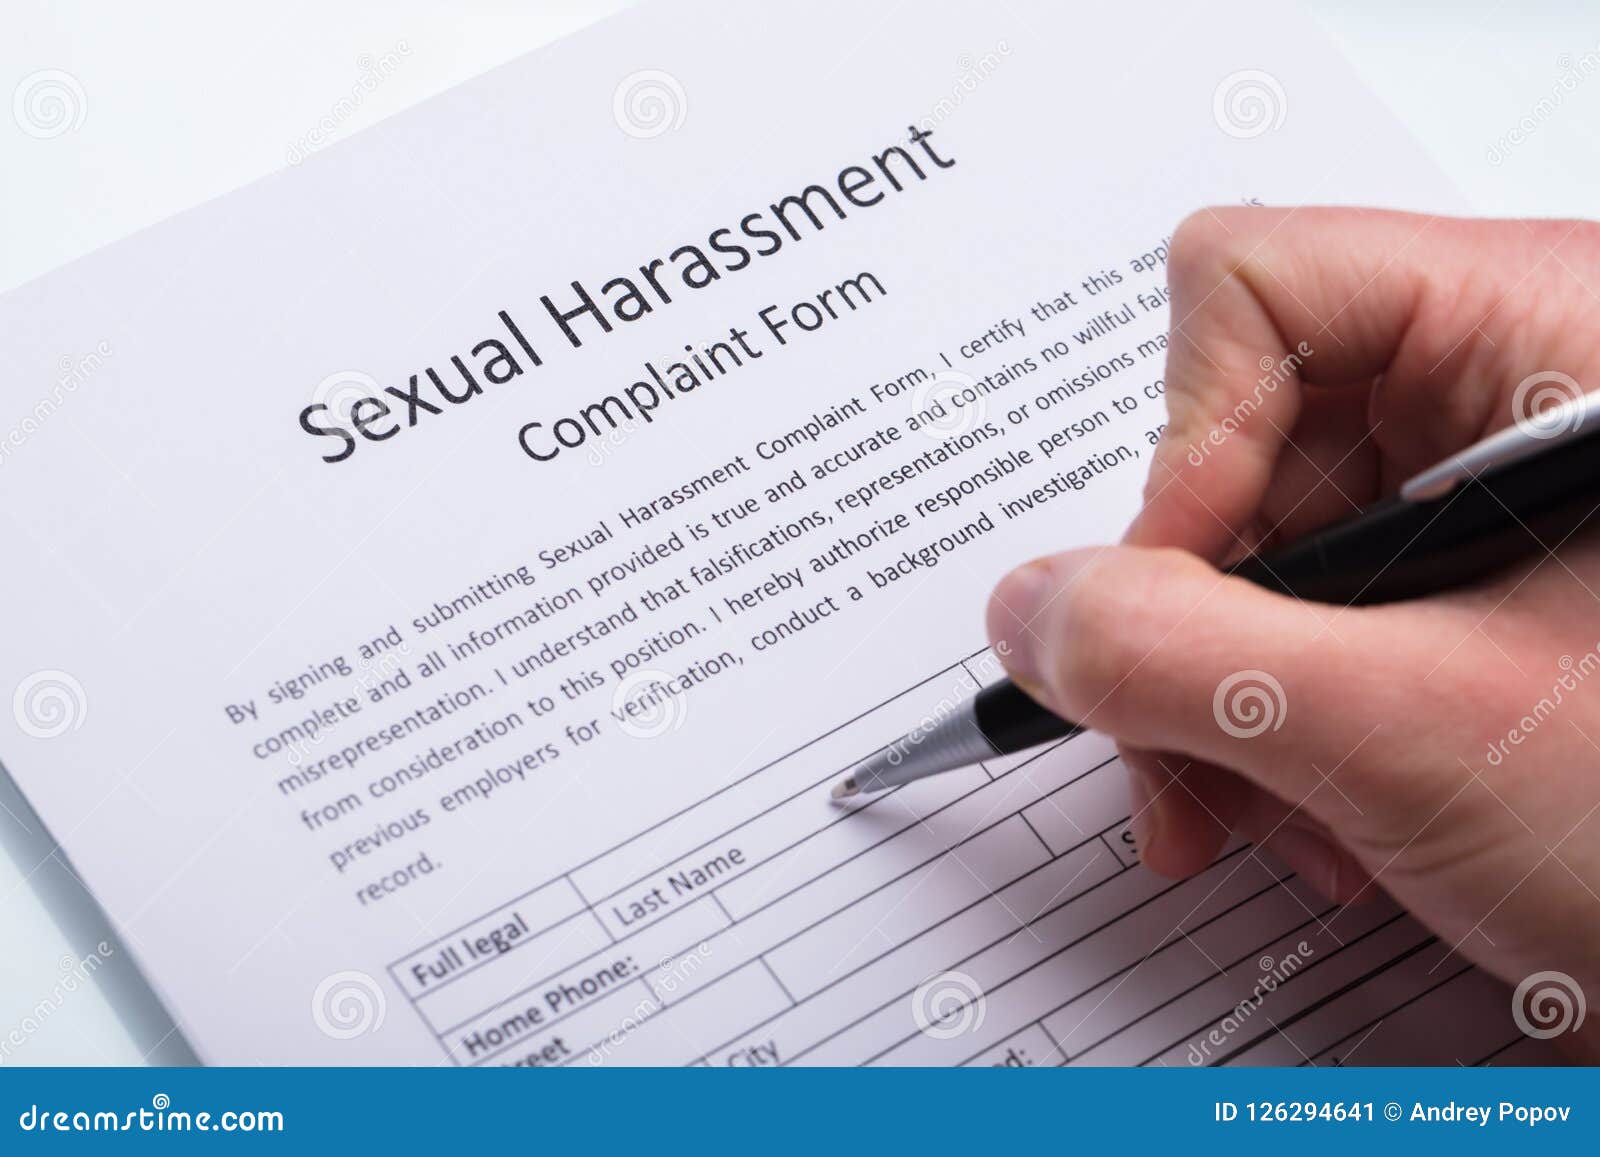 human hand filling sexual harassment complaint form